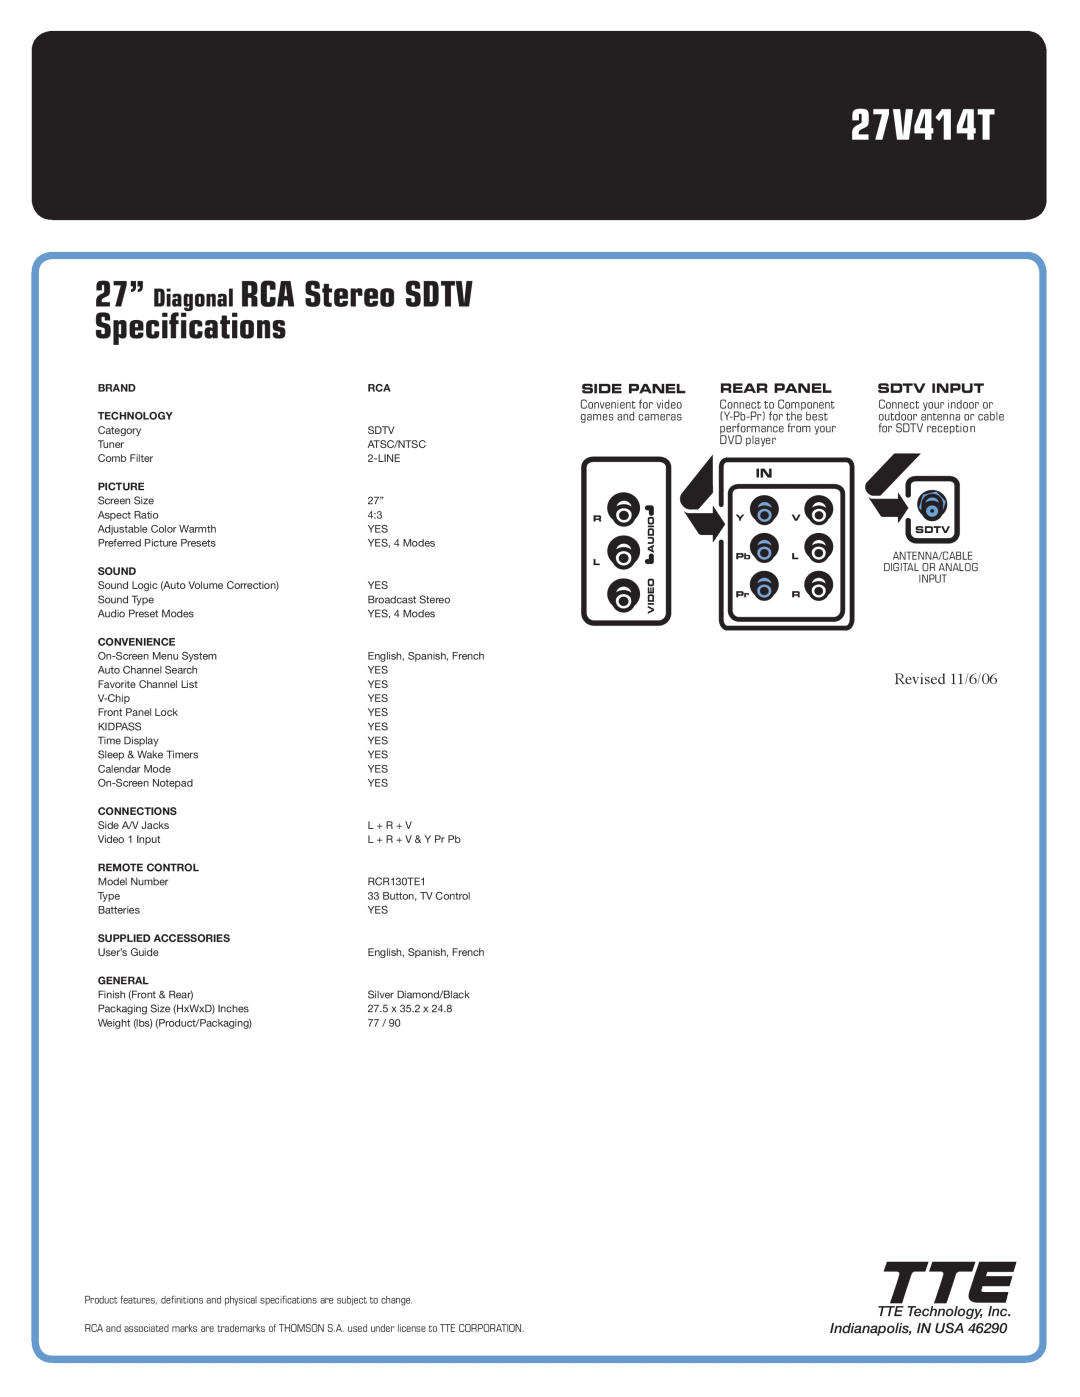 RCA 27V414T 27” Diagonal RCA Stereo SDTV Specifications, Revised 11/6/06, TTE Technology, Inc. Indianapolis, IN USA, Brand 